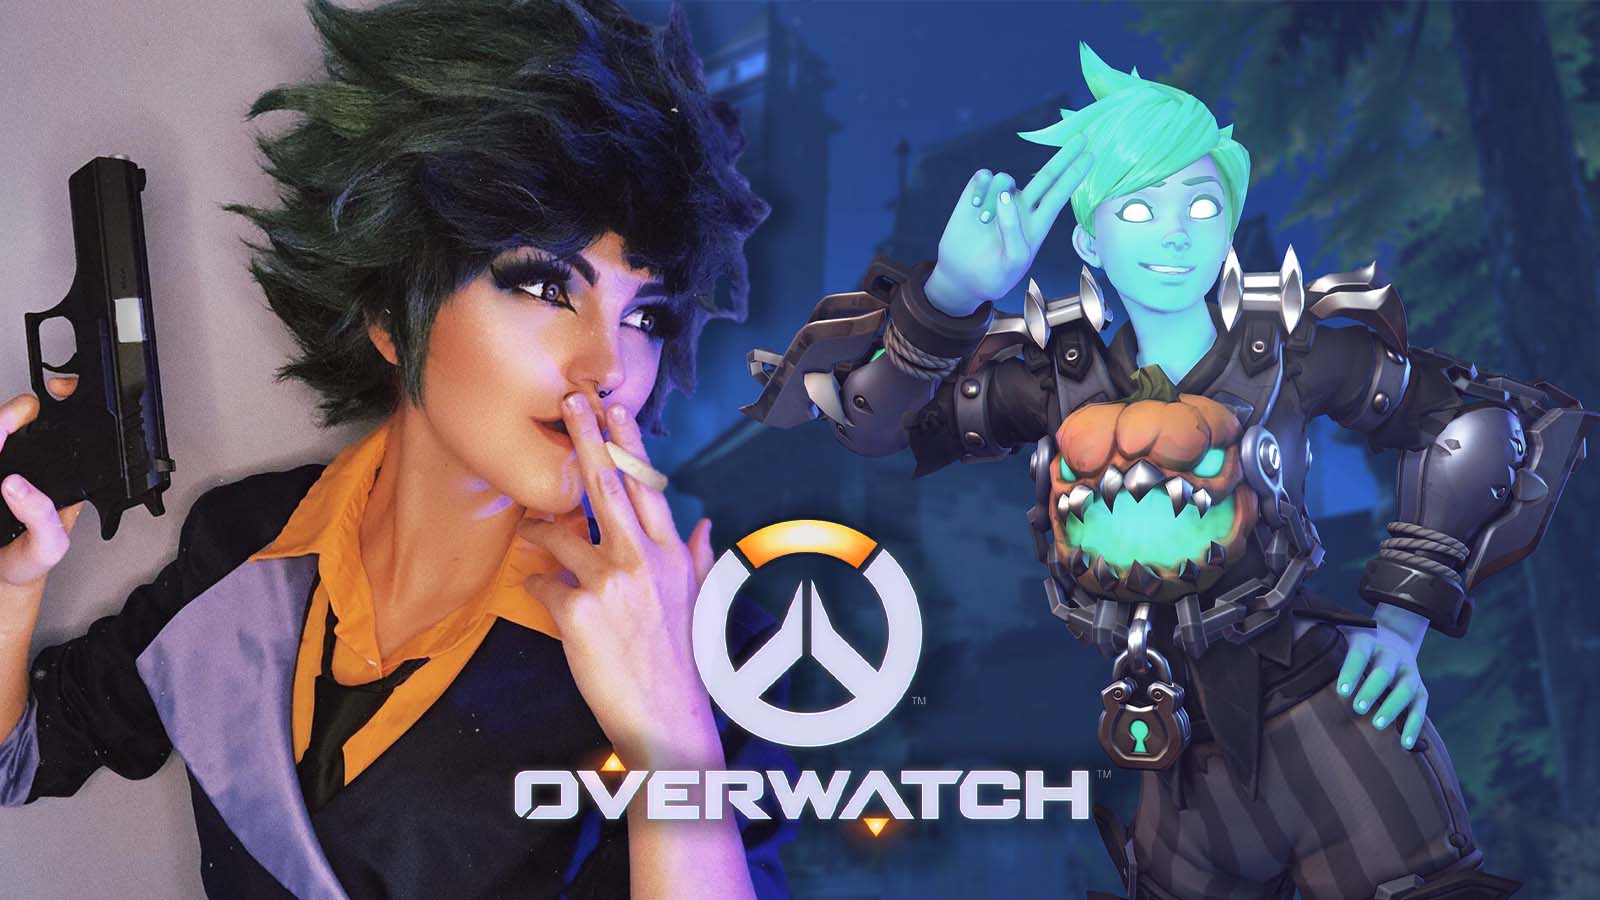 Overwatch Tracer Will-O-the-Wisp cosplay